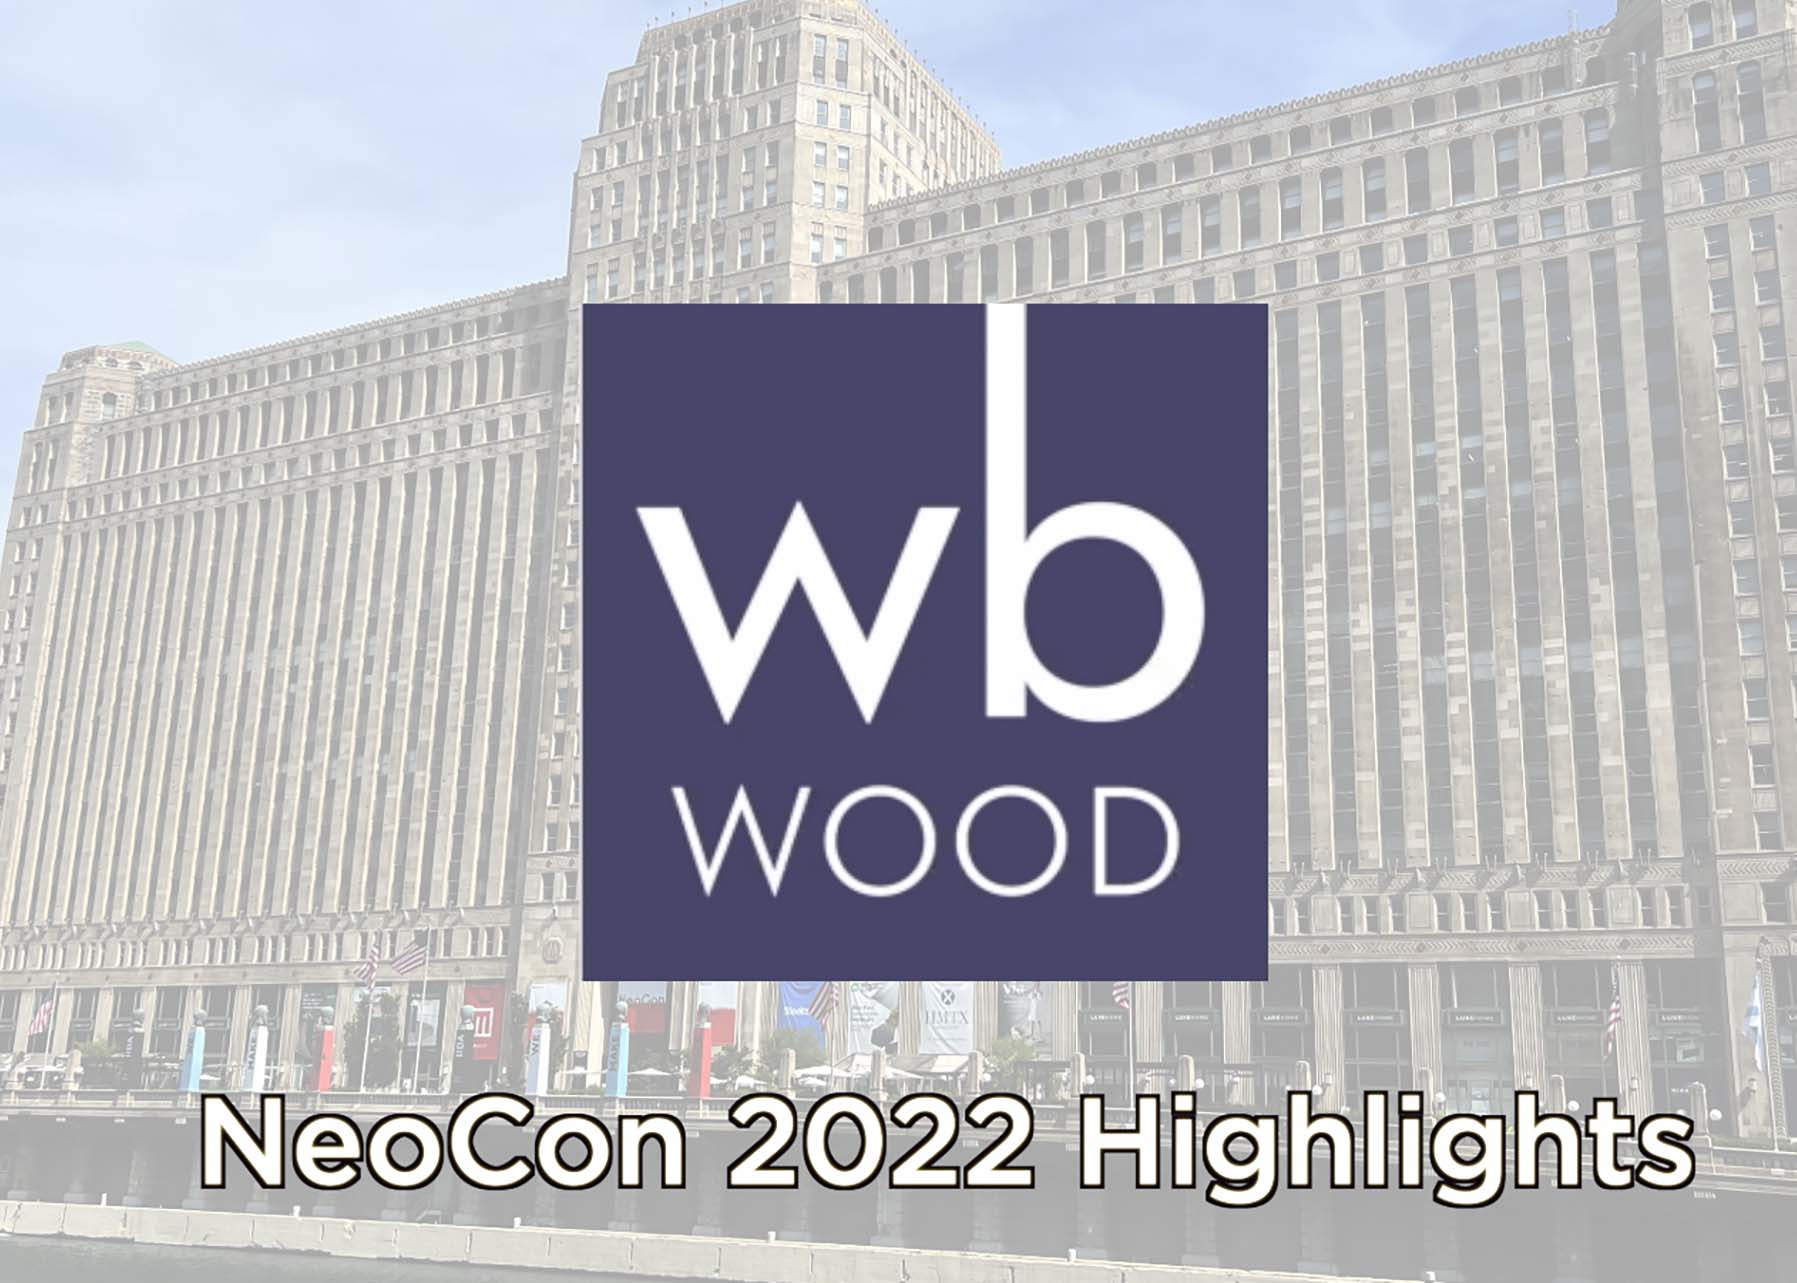 NeoCon 2022 Highlights | Since 1969 | WB WOOD